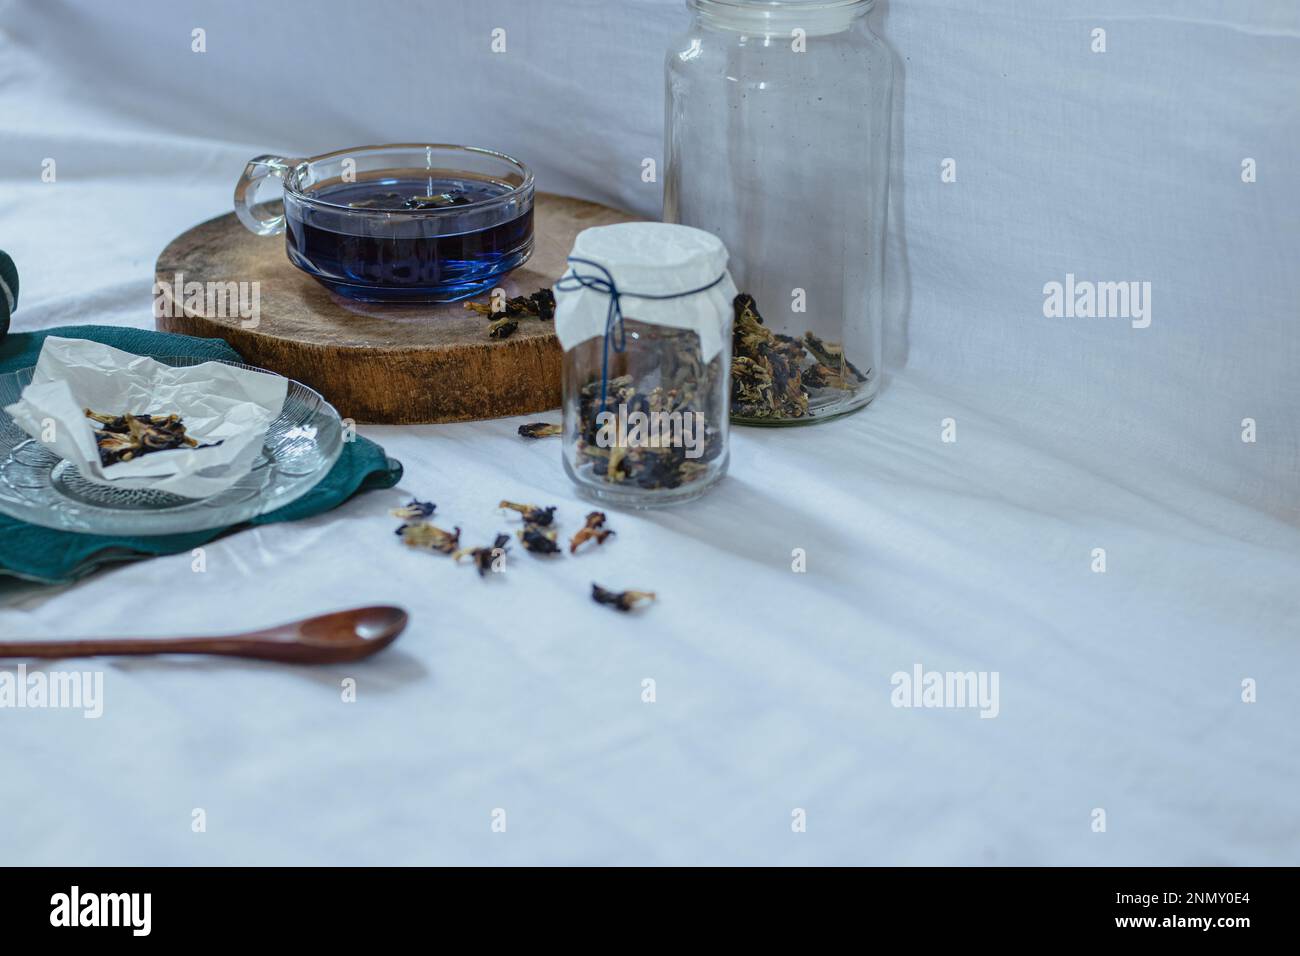 Healthy herbal butterfly pea tea showing the candid moments of home life, slow living and spring aesthetic Stock Photo